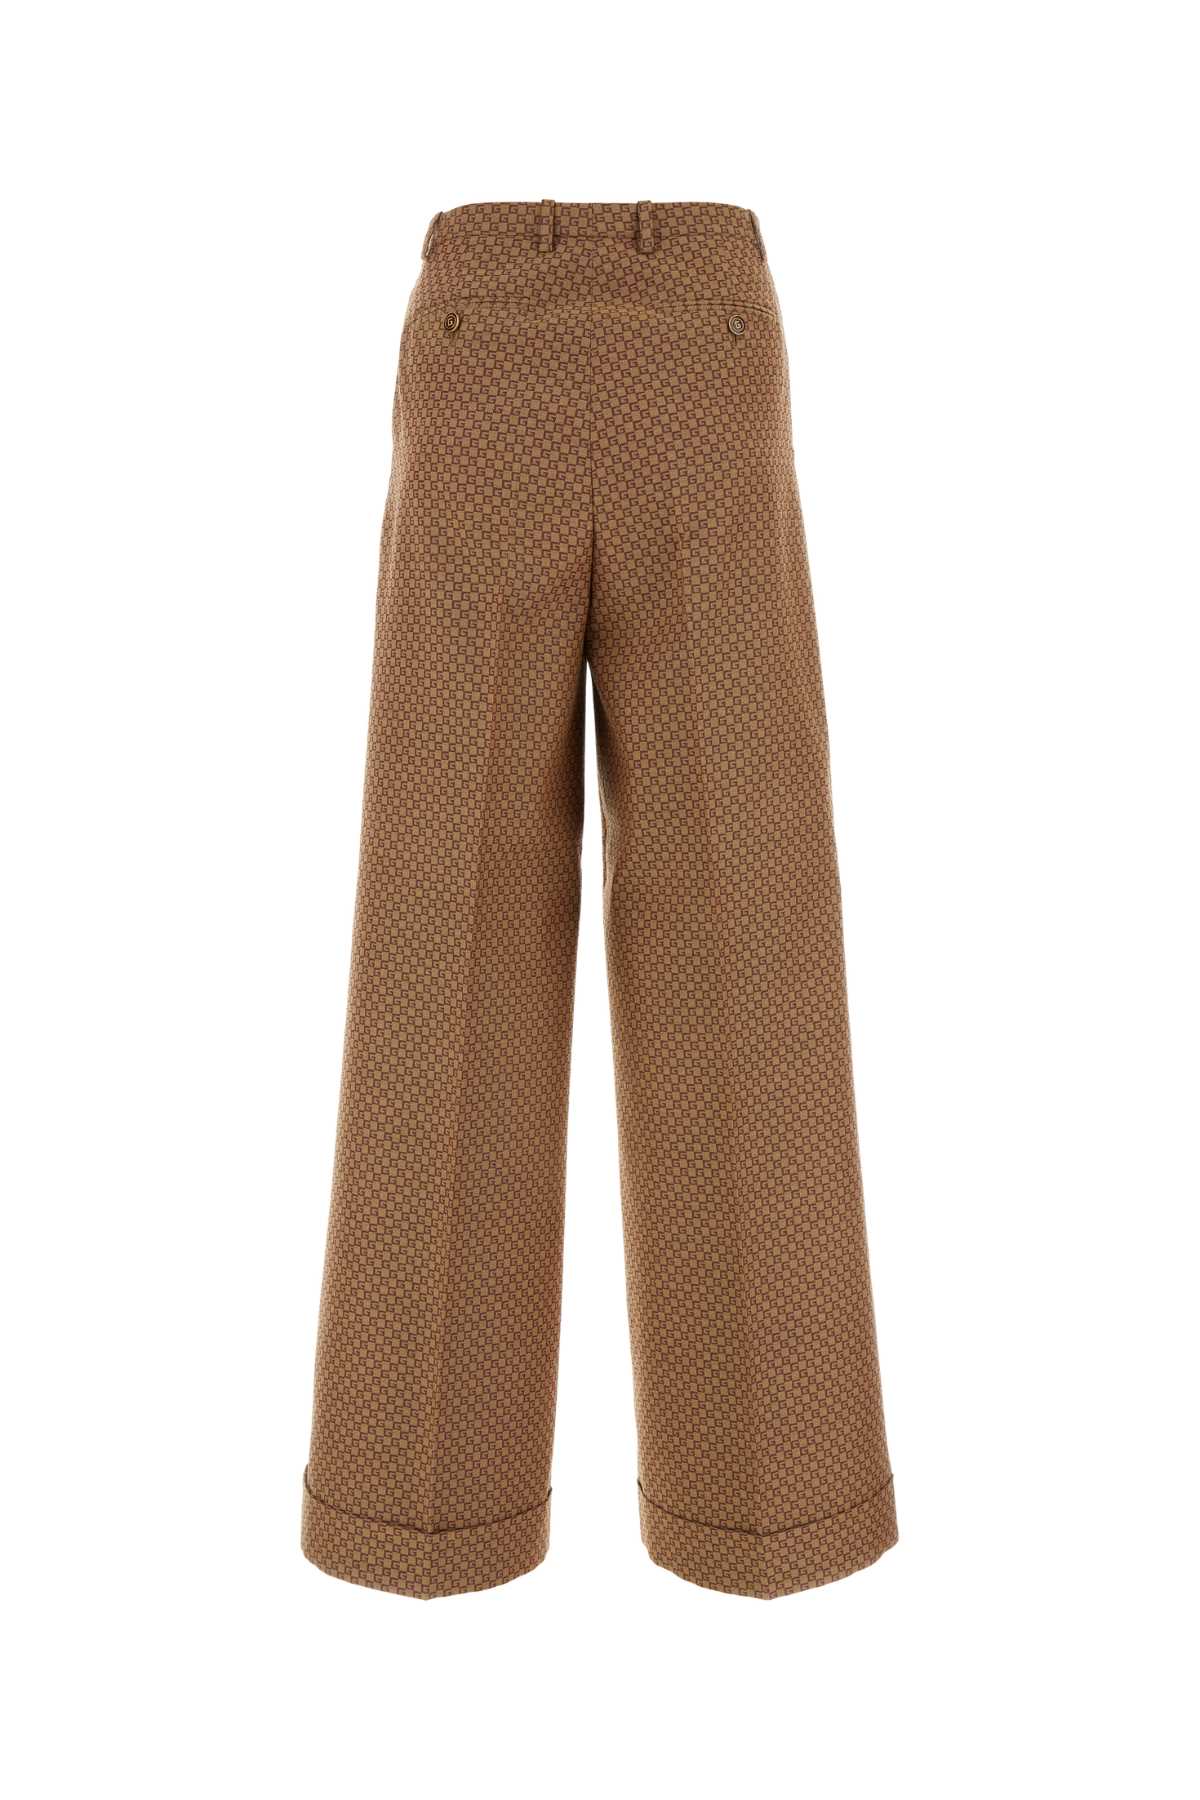 GUCCI EMBROIDERED POLYESTER BLEND PANT